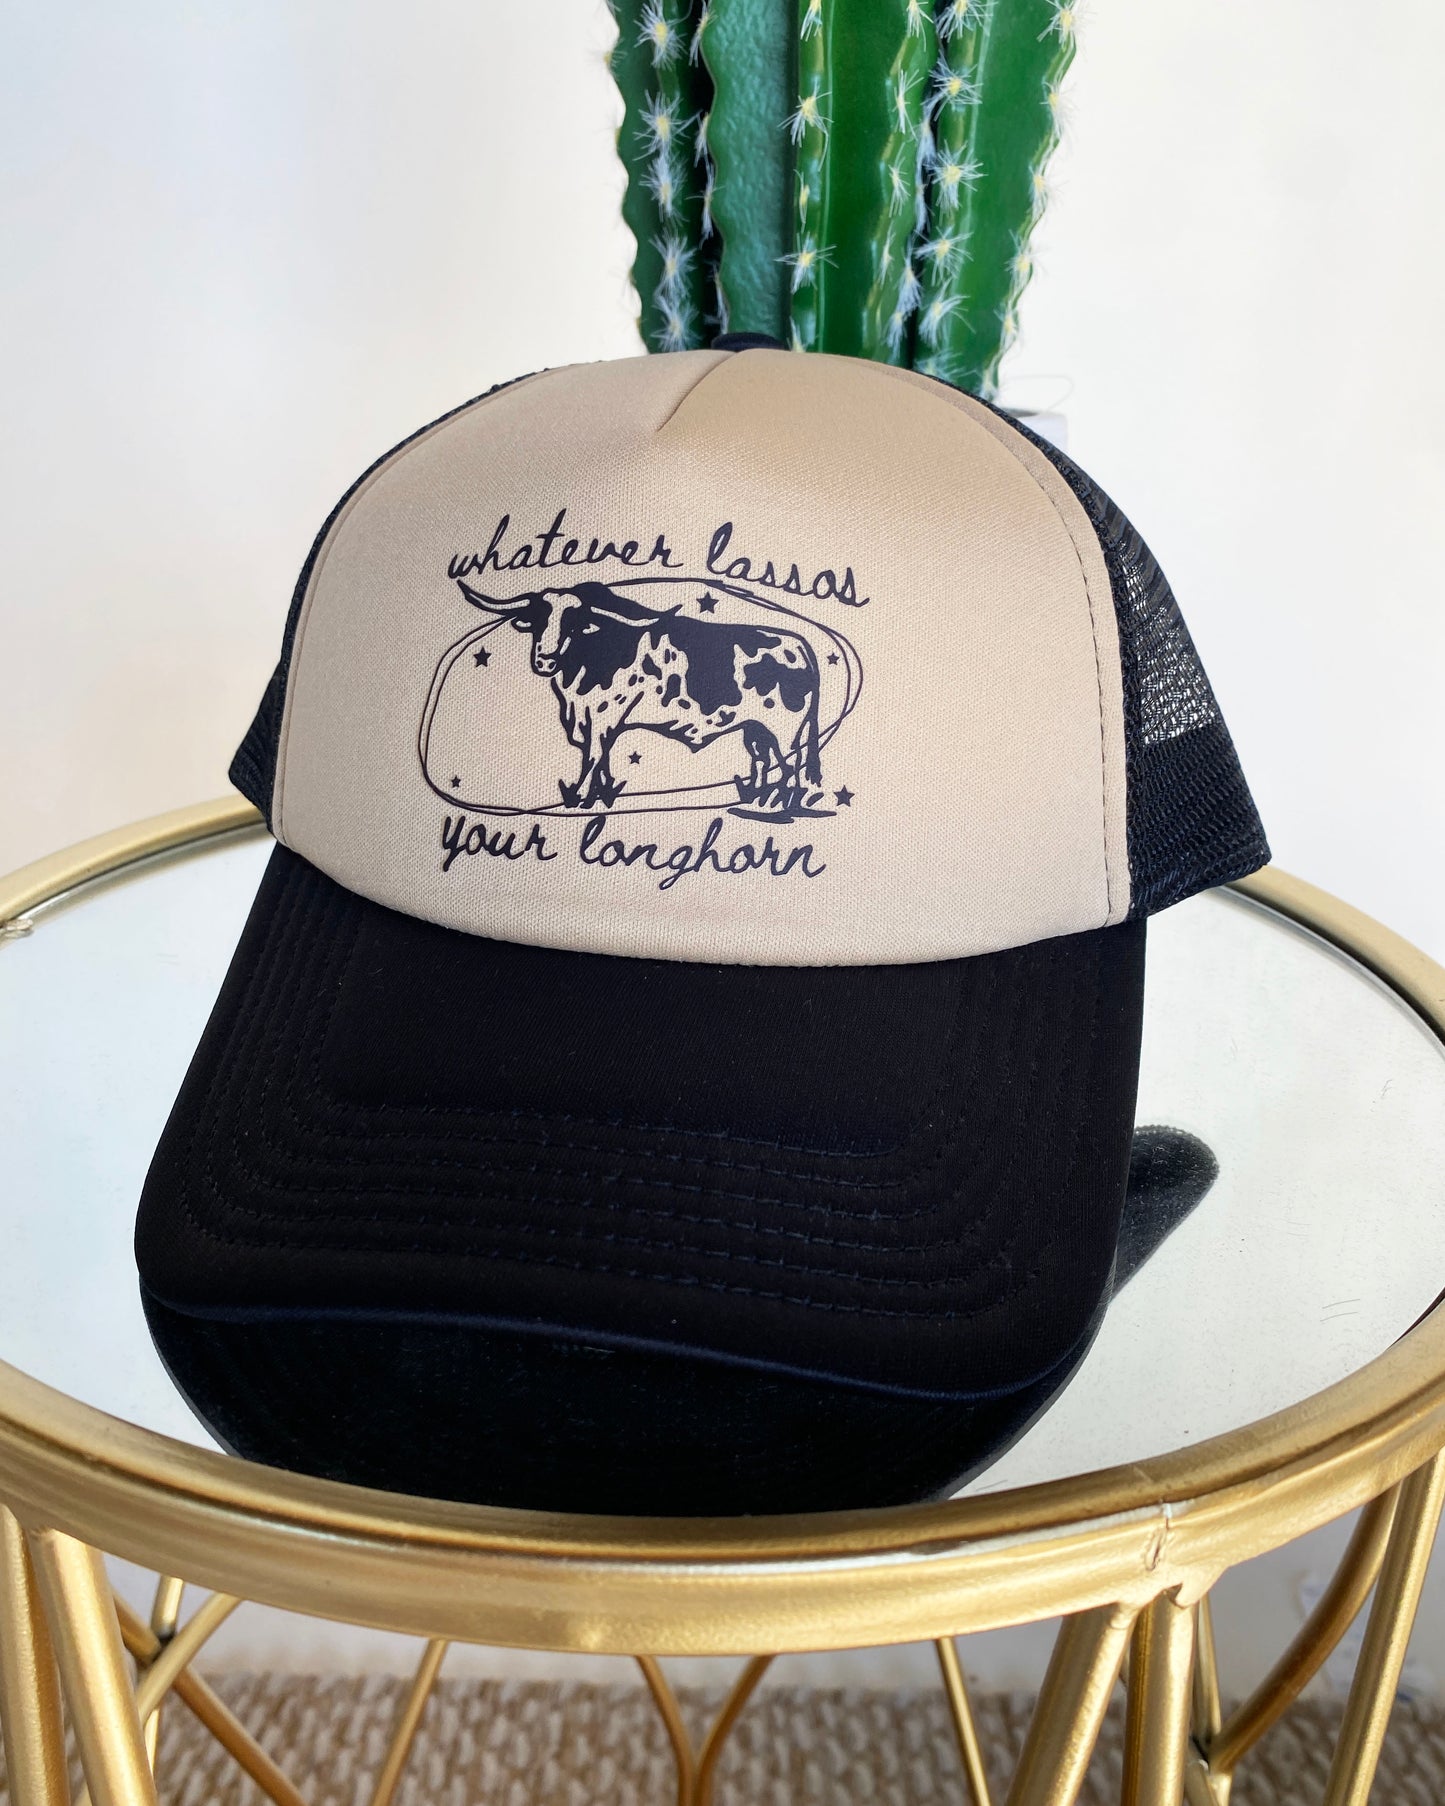 Whatever Lassos Your Longhorn Trucker Hat by Ali Dee - Black and Tan